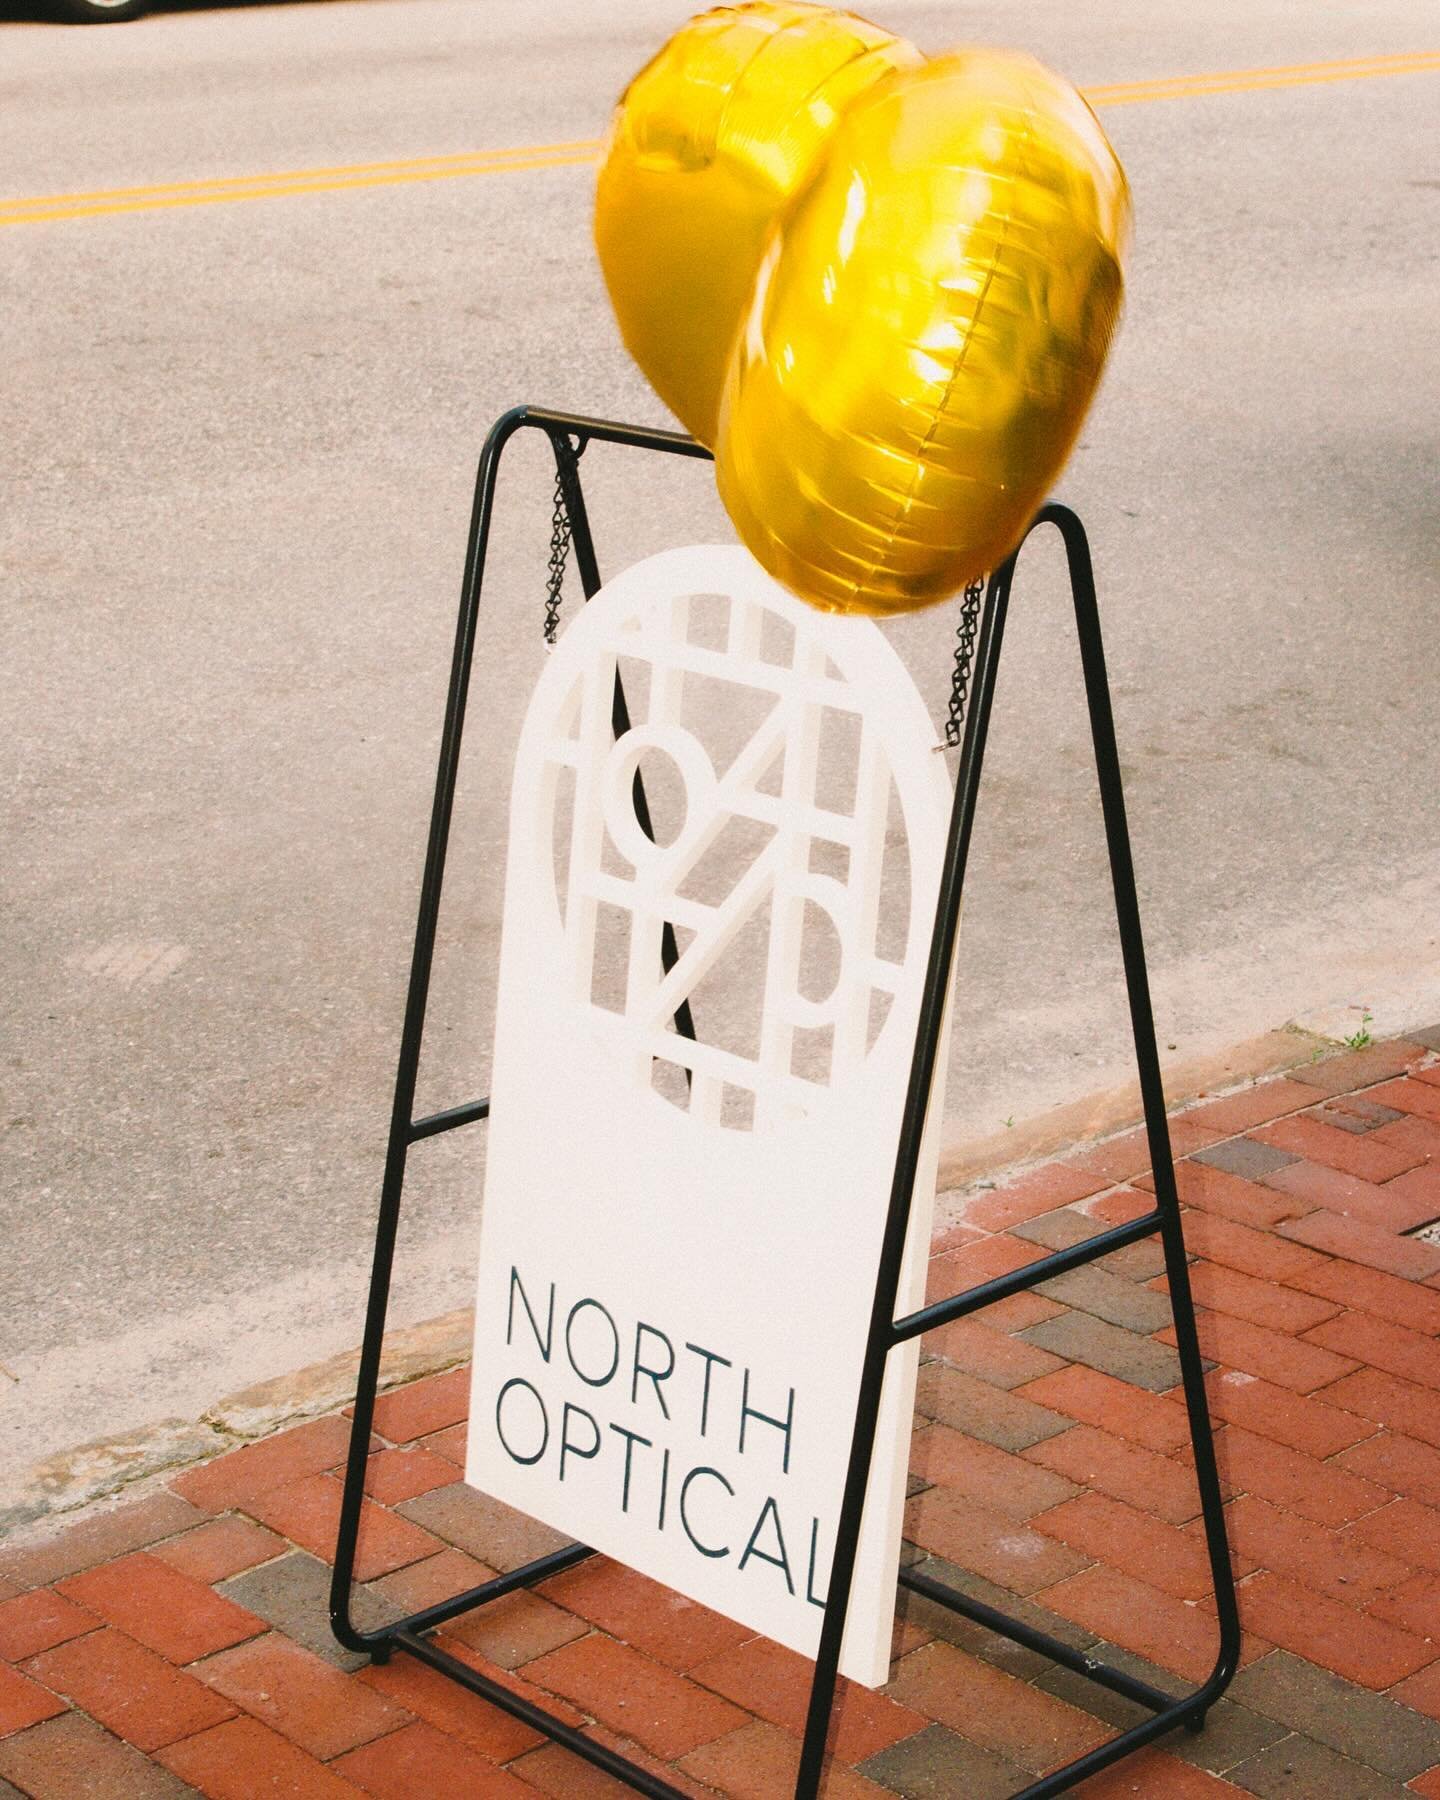 It has been a goal for us since day one to do events. We have a few things in the works that we can&rsquo;t wait to announce 📣 Updates very soon! 
.
.
.
.
.
.
#northoptical #seeyousoon #portlandmaine #portland #maine #visitportlandme #onlyinmaine #v